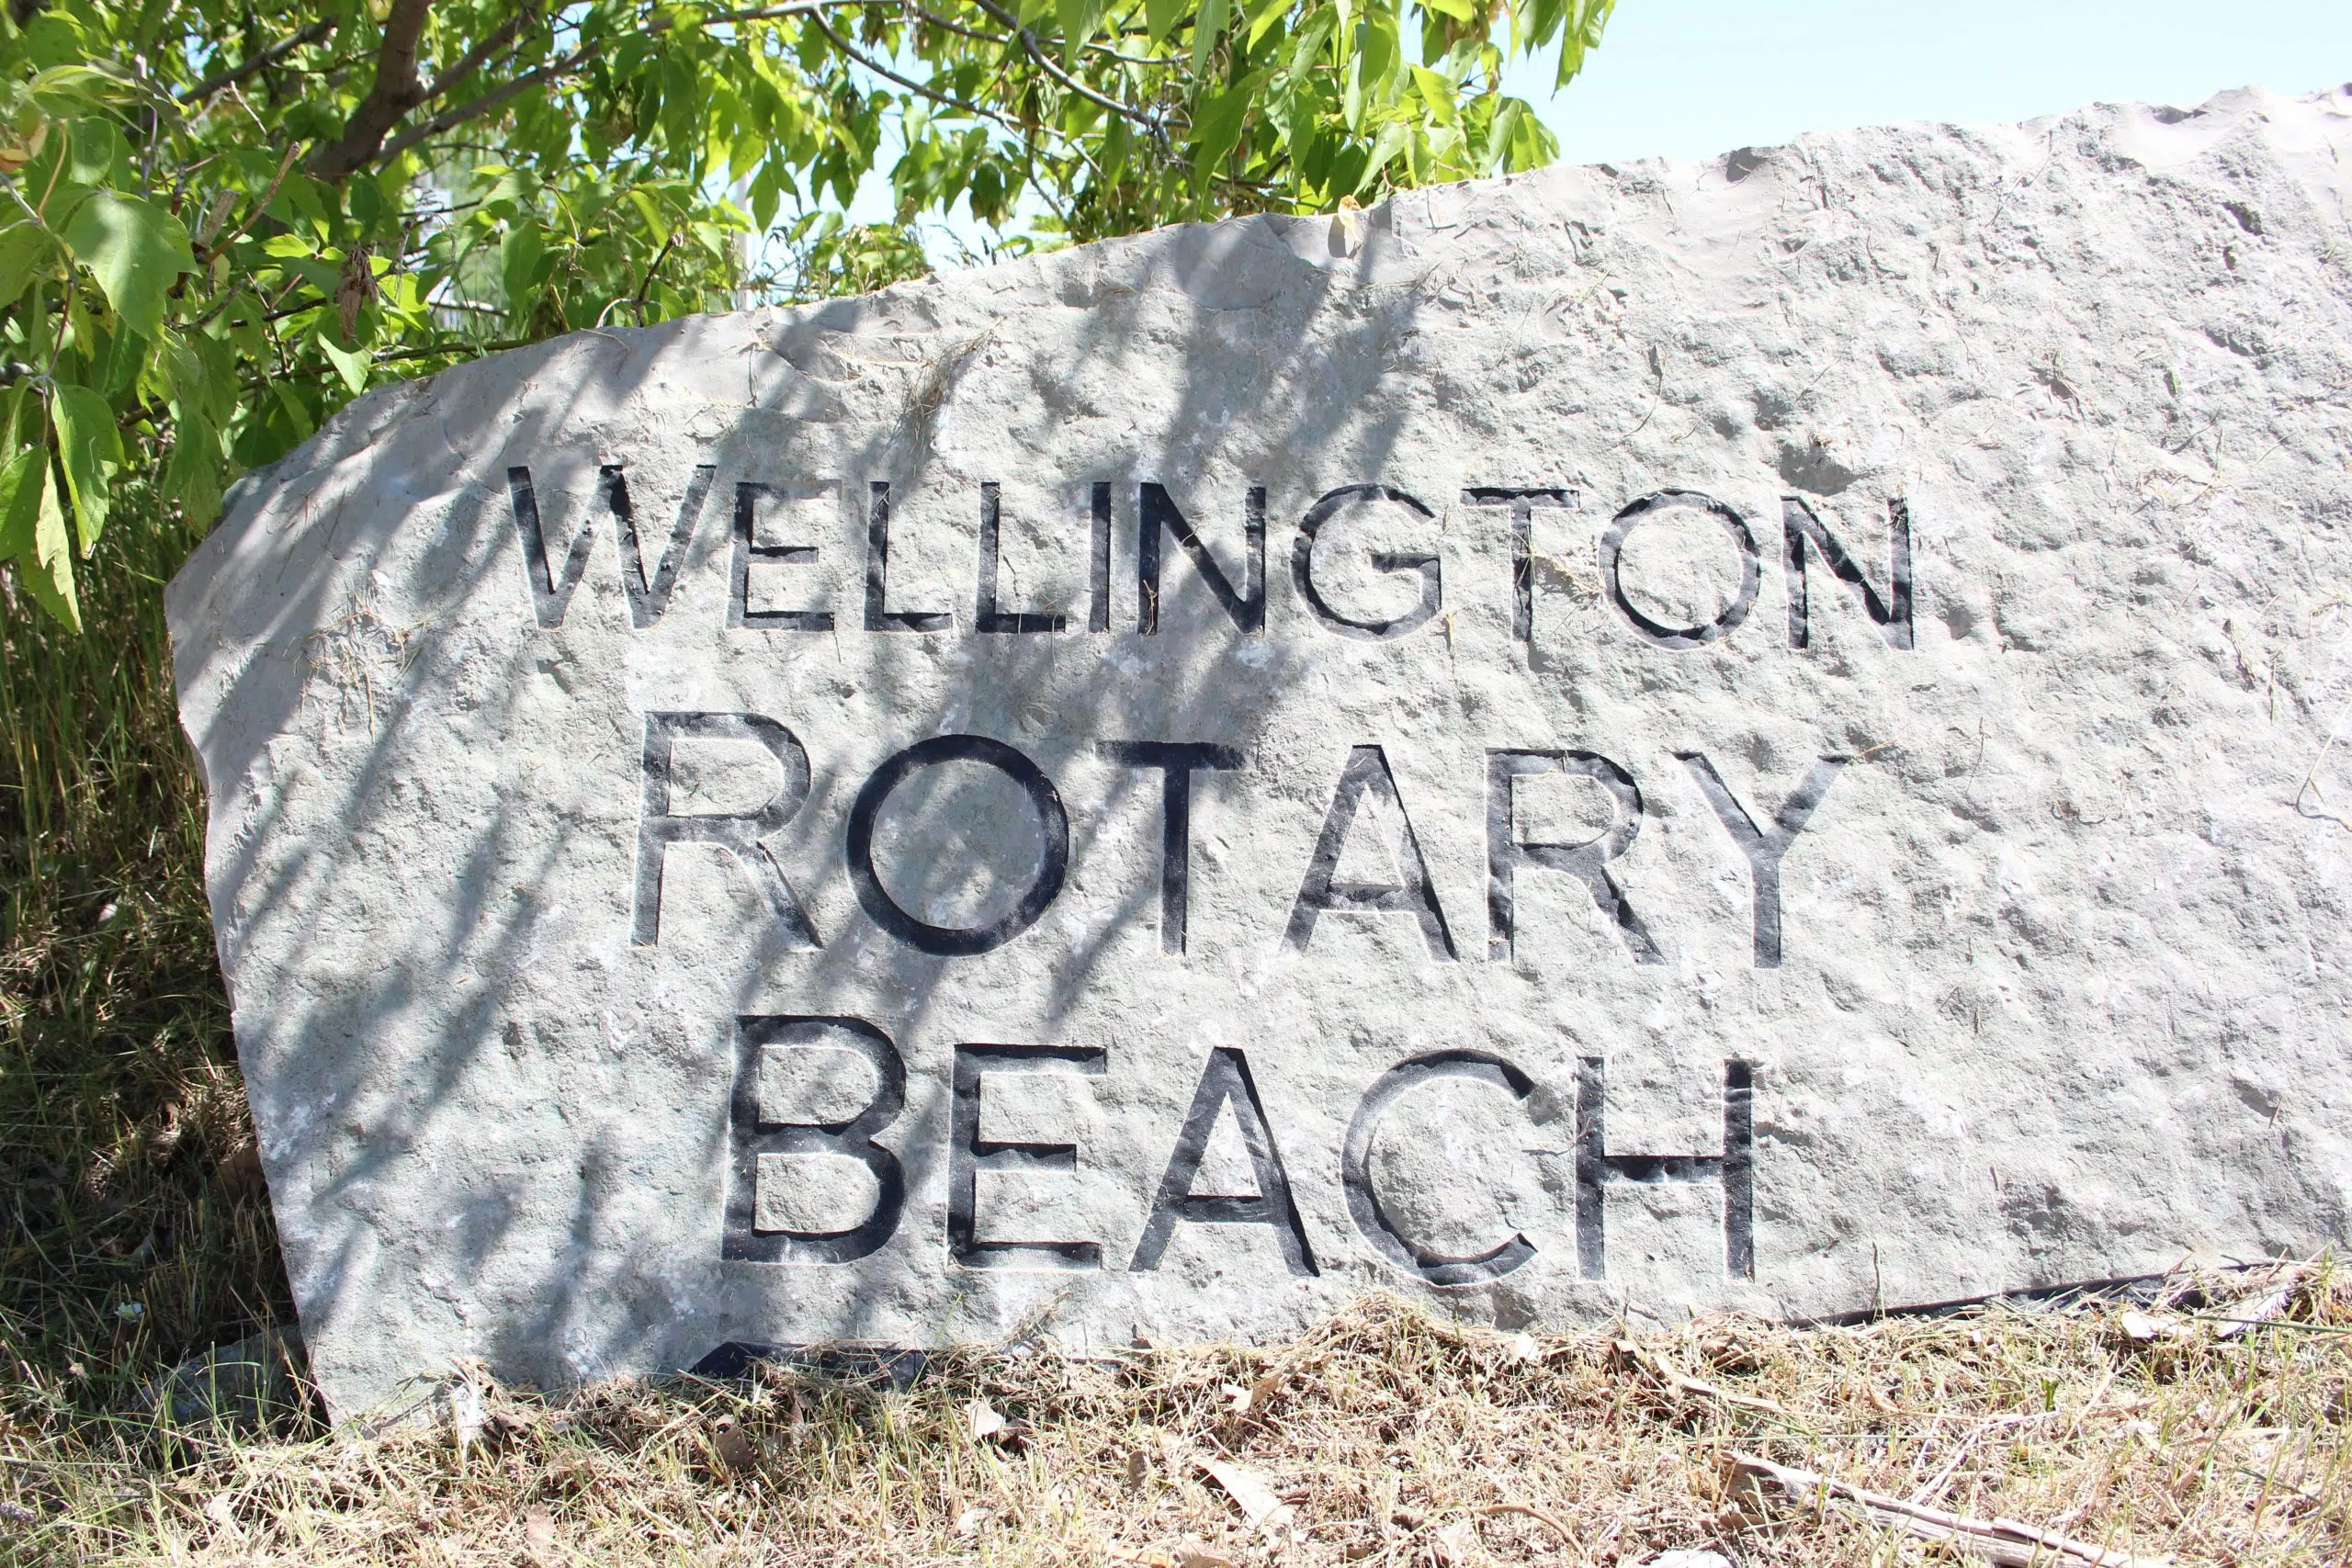 Accessibility improvements planned for Wellington beach